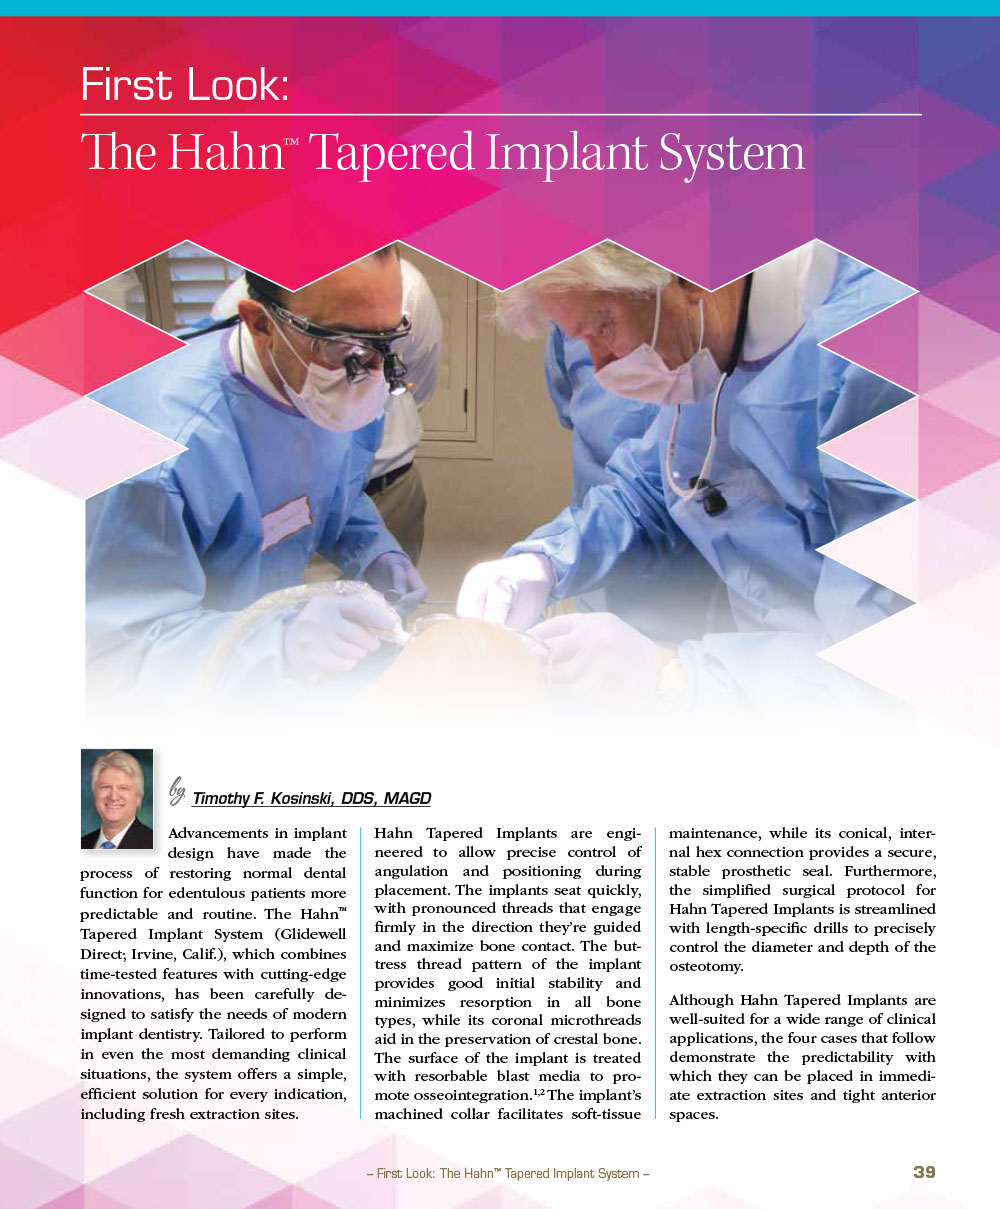 First Look: The Hahn™ Tapered Implant System